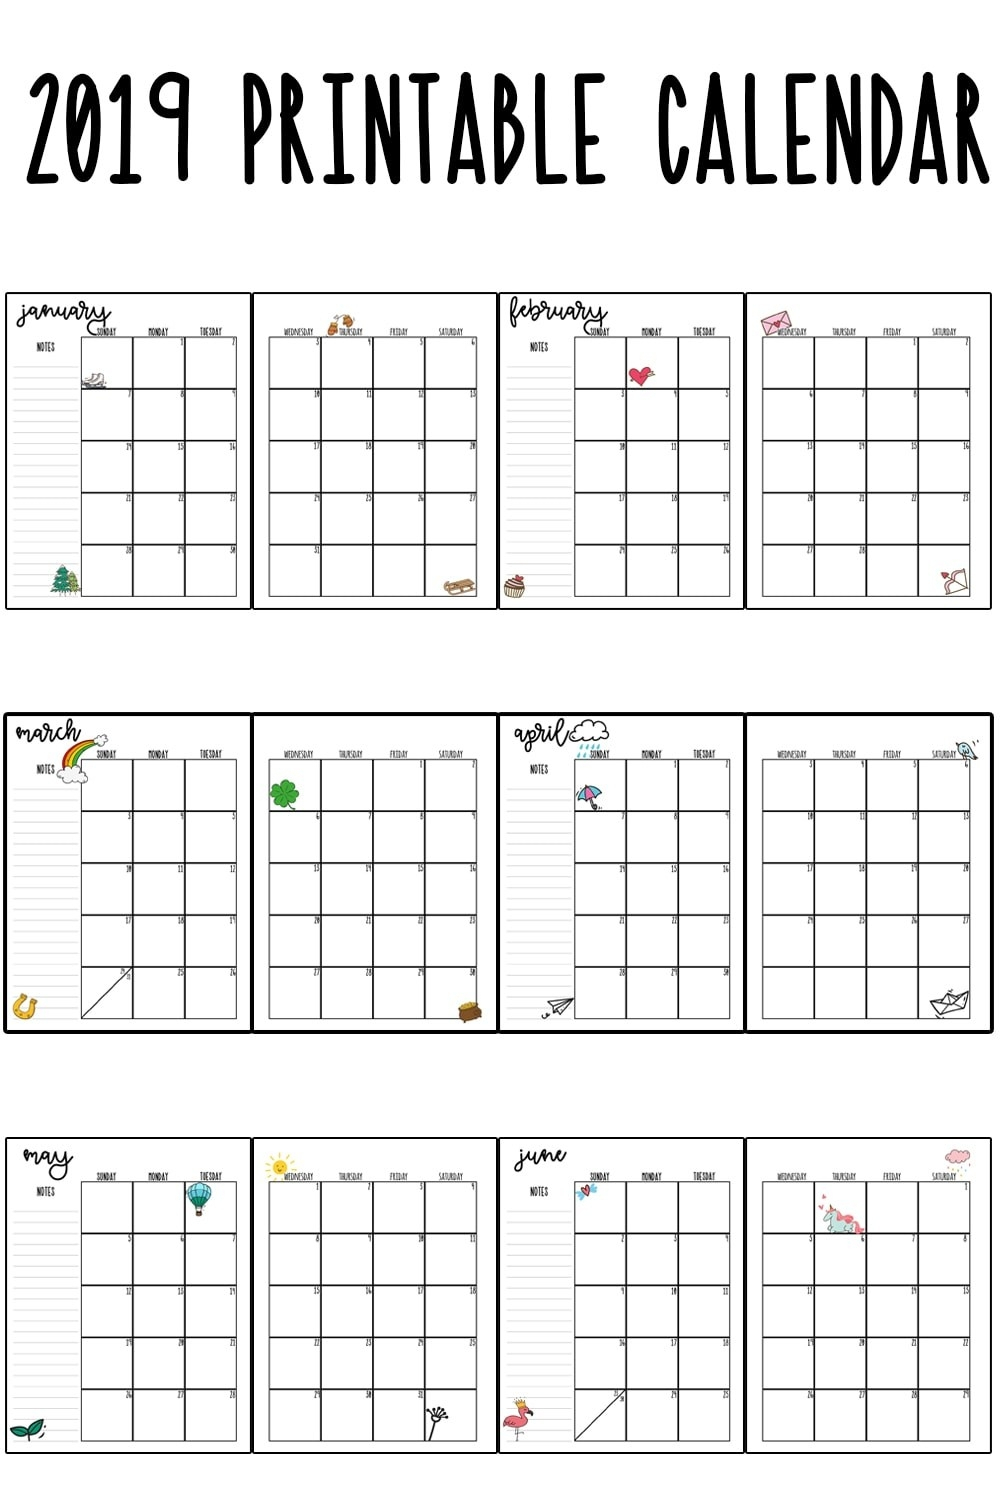 At A Glance Monthly Calendar Printable | Calendar Template pertaining to Blank Year At A Glance Calendar